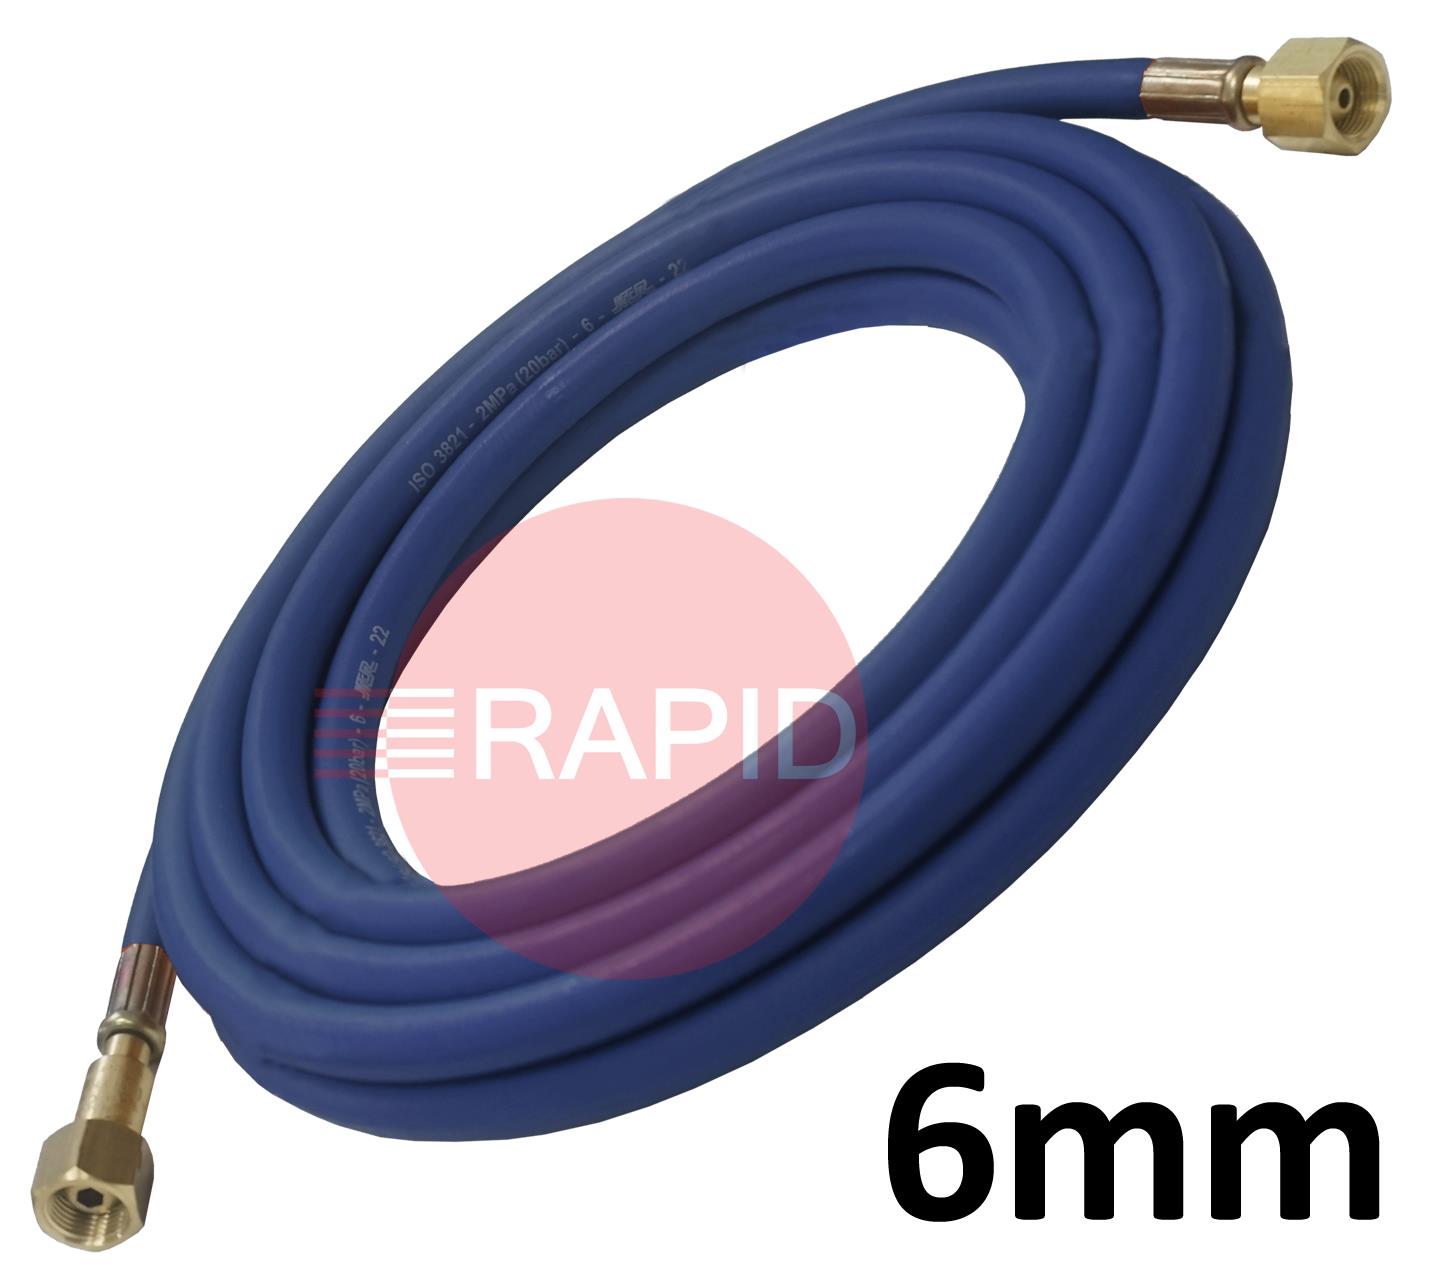 A5113  Fitted Oxygen Hose. 6mm Bore. G3/8 Check Valve & G3/8 Regulator Connection - 20m